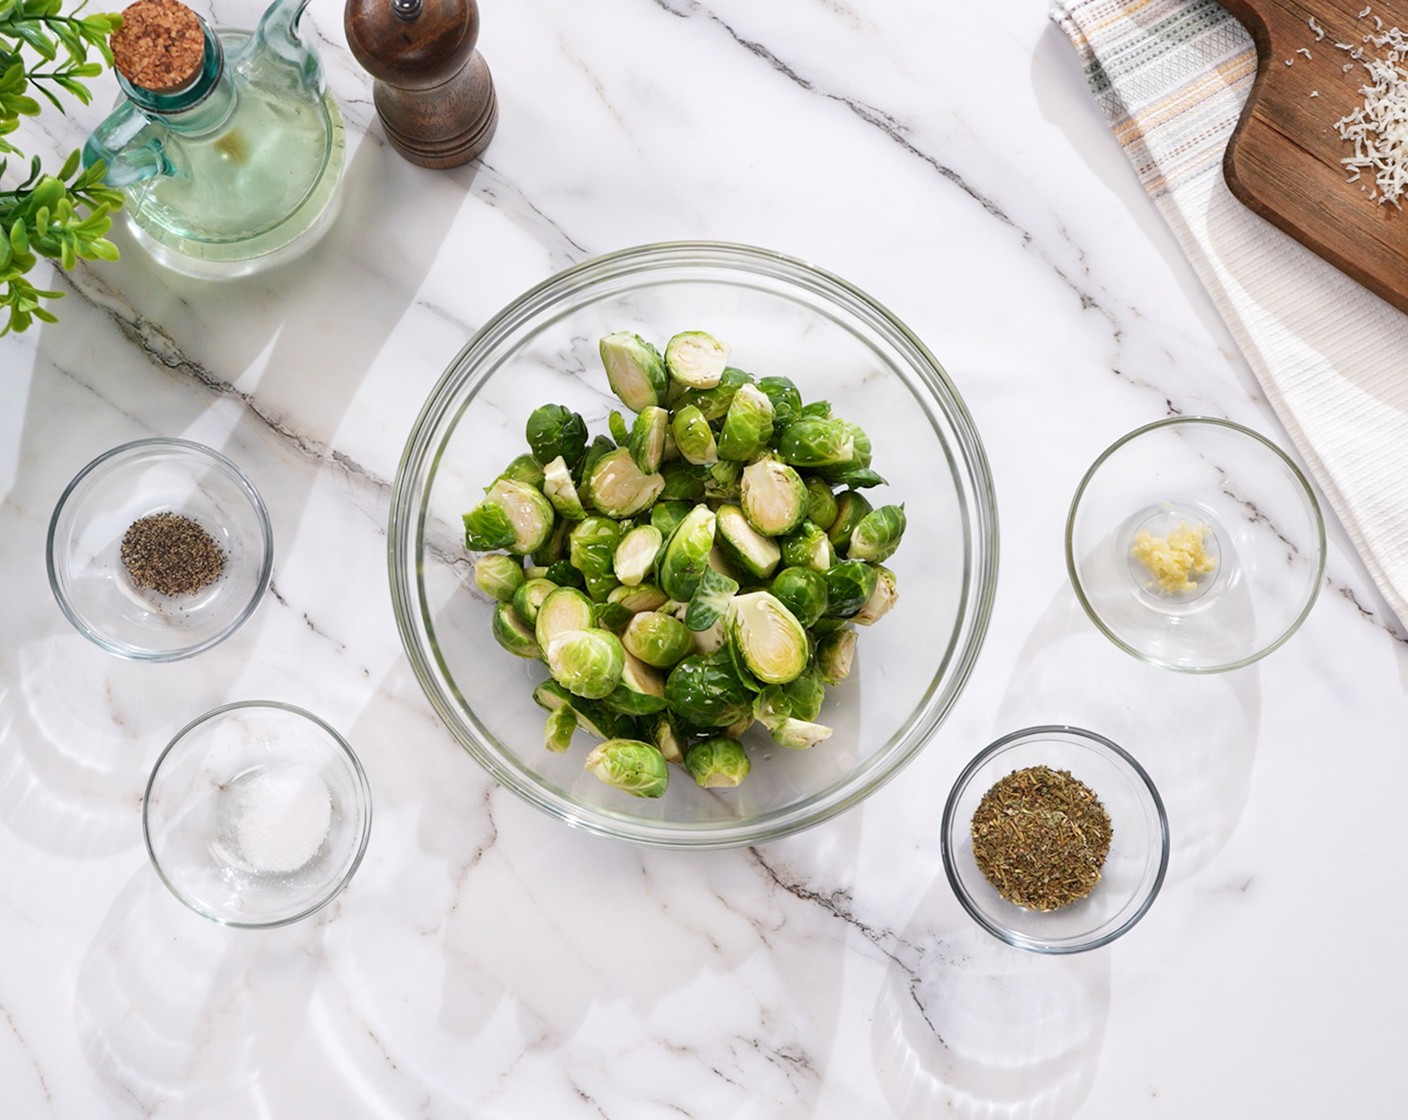 step 1 In a large bowl, toss the Brussels Sprouts (5 cups) with Olive Oil (1 Tbsp), Garlic (1 clove), Italian Seasoning (1 Tbsp), Salt (1/2 tsp), and Ground Black Pepper (1/4 tsp).